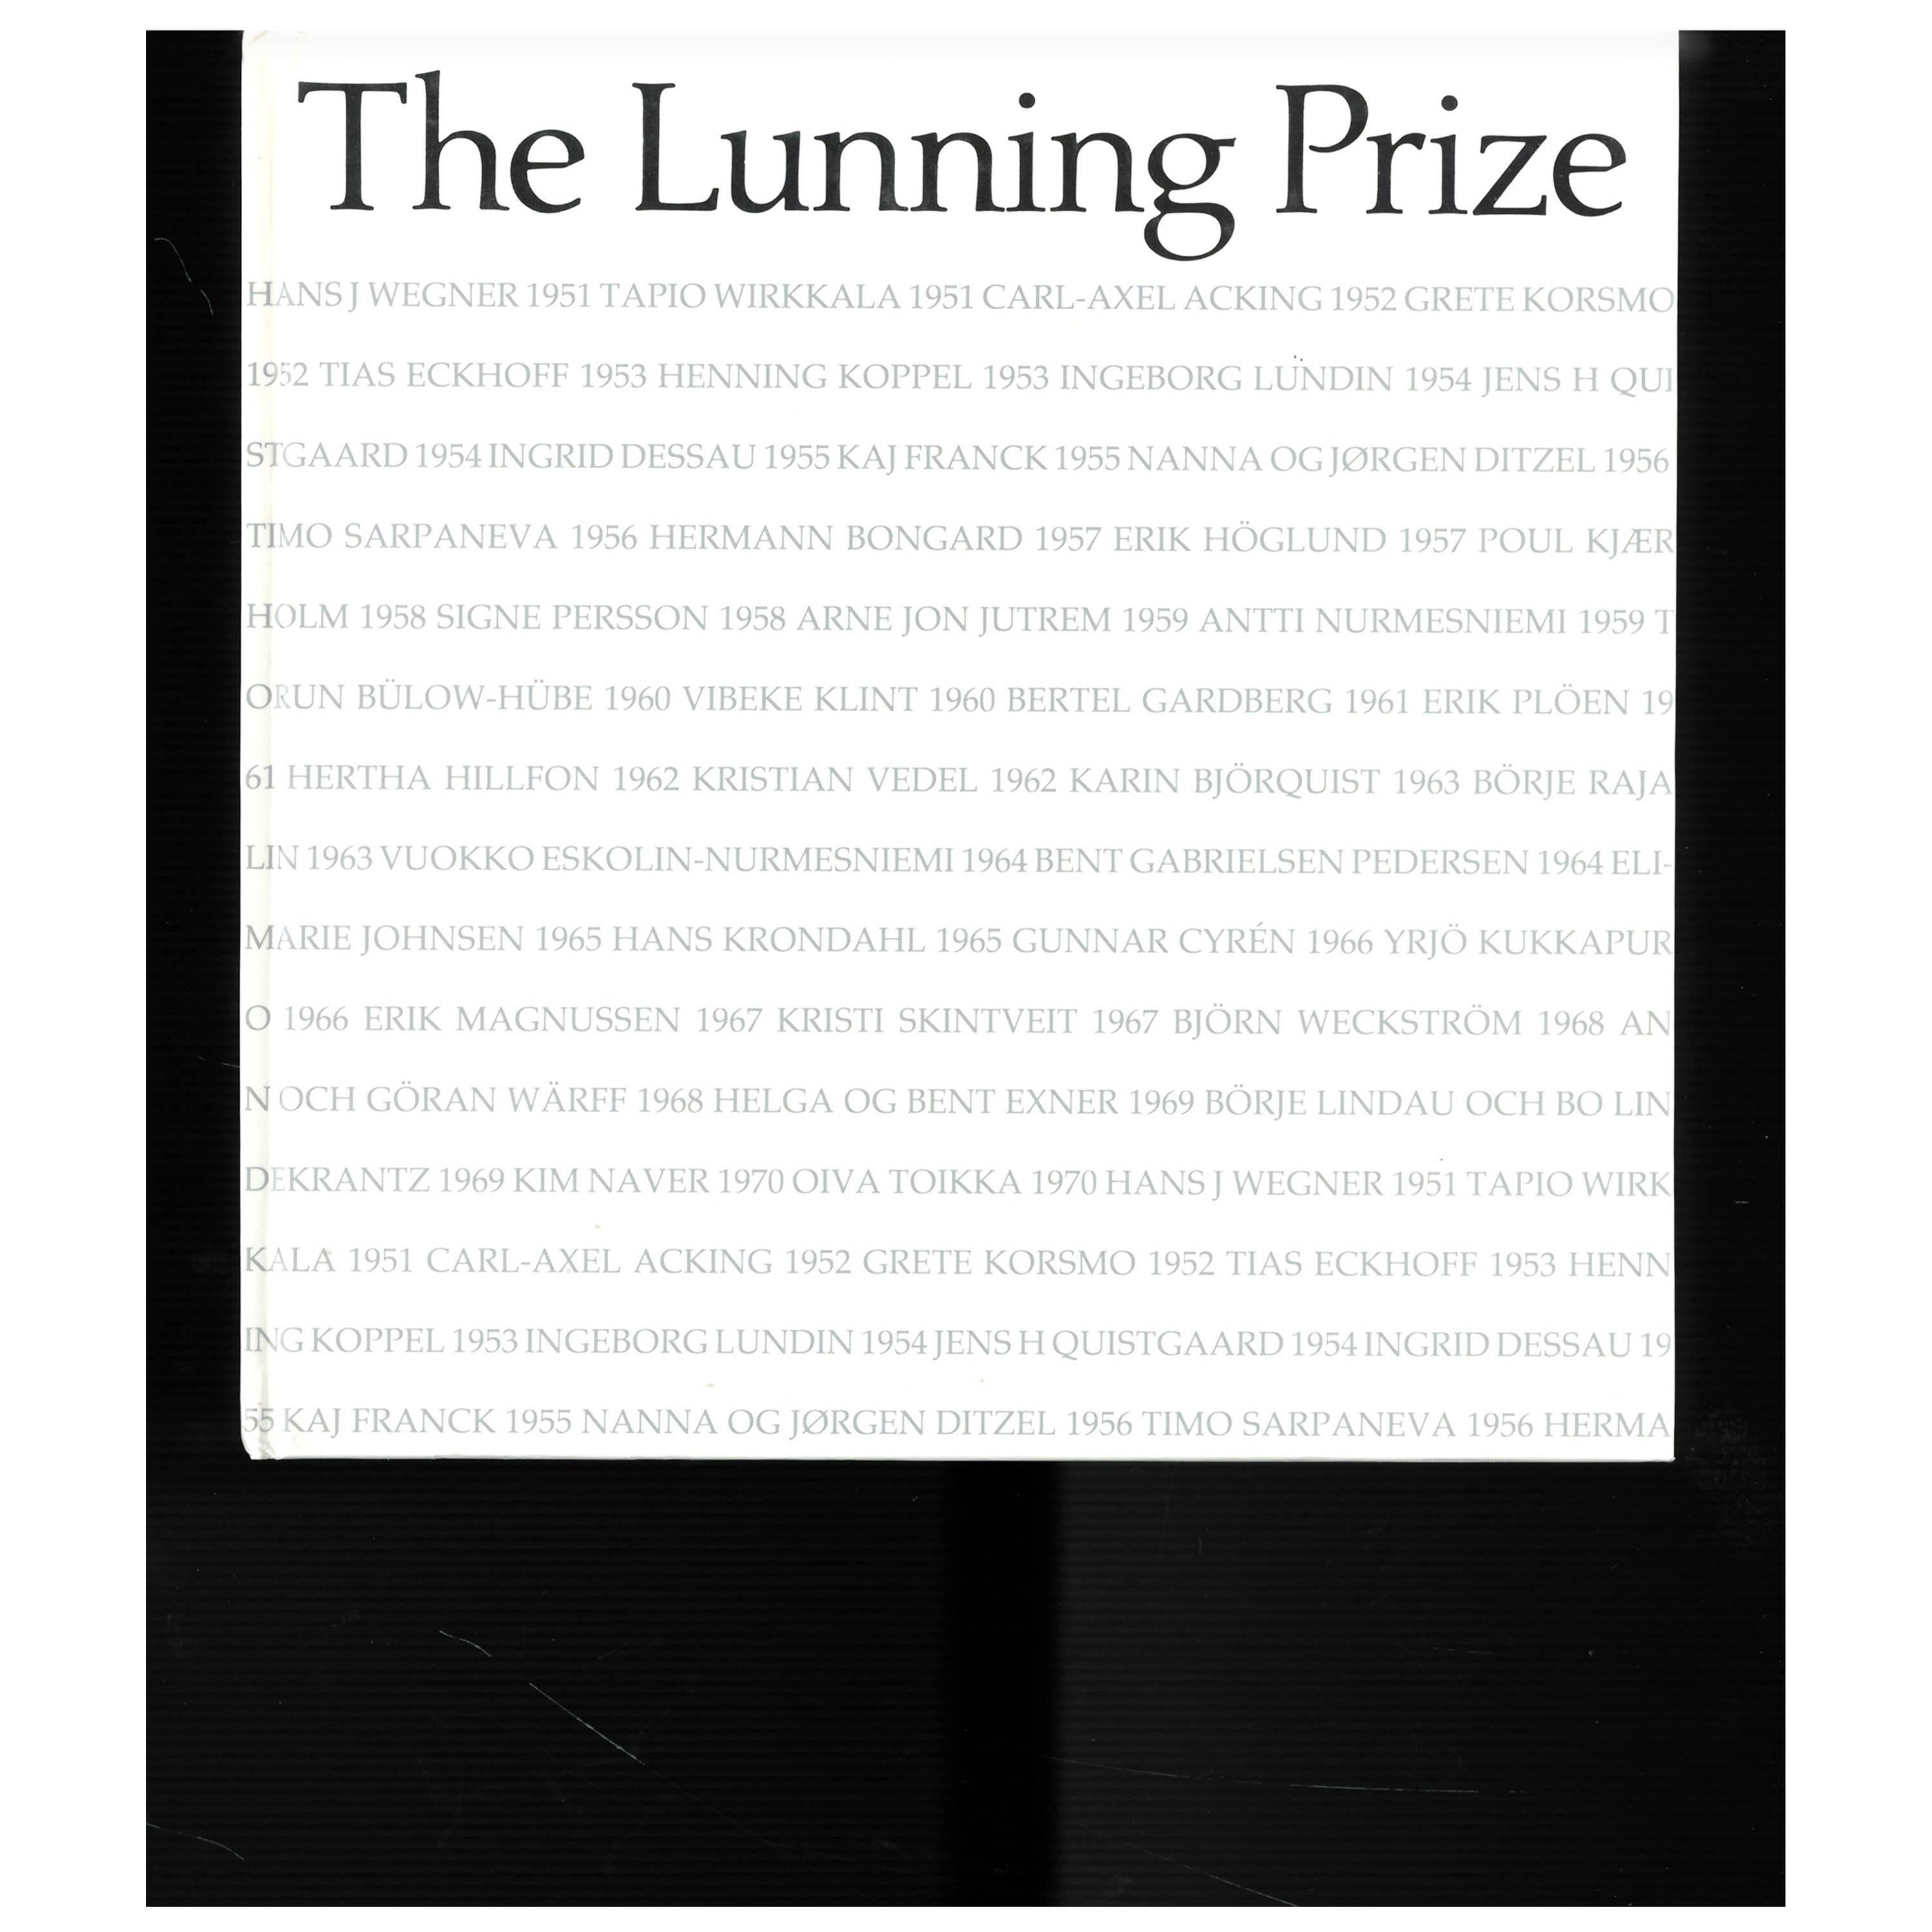 The Lunning Prize (Livre)